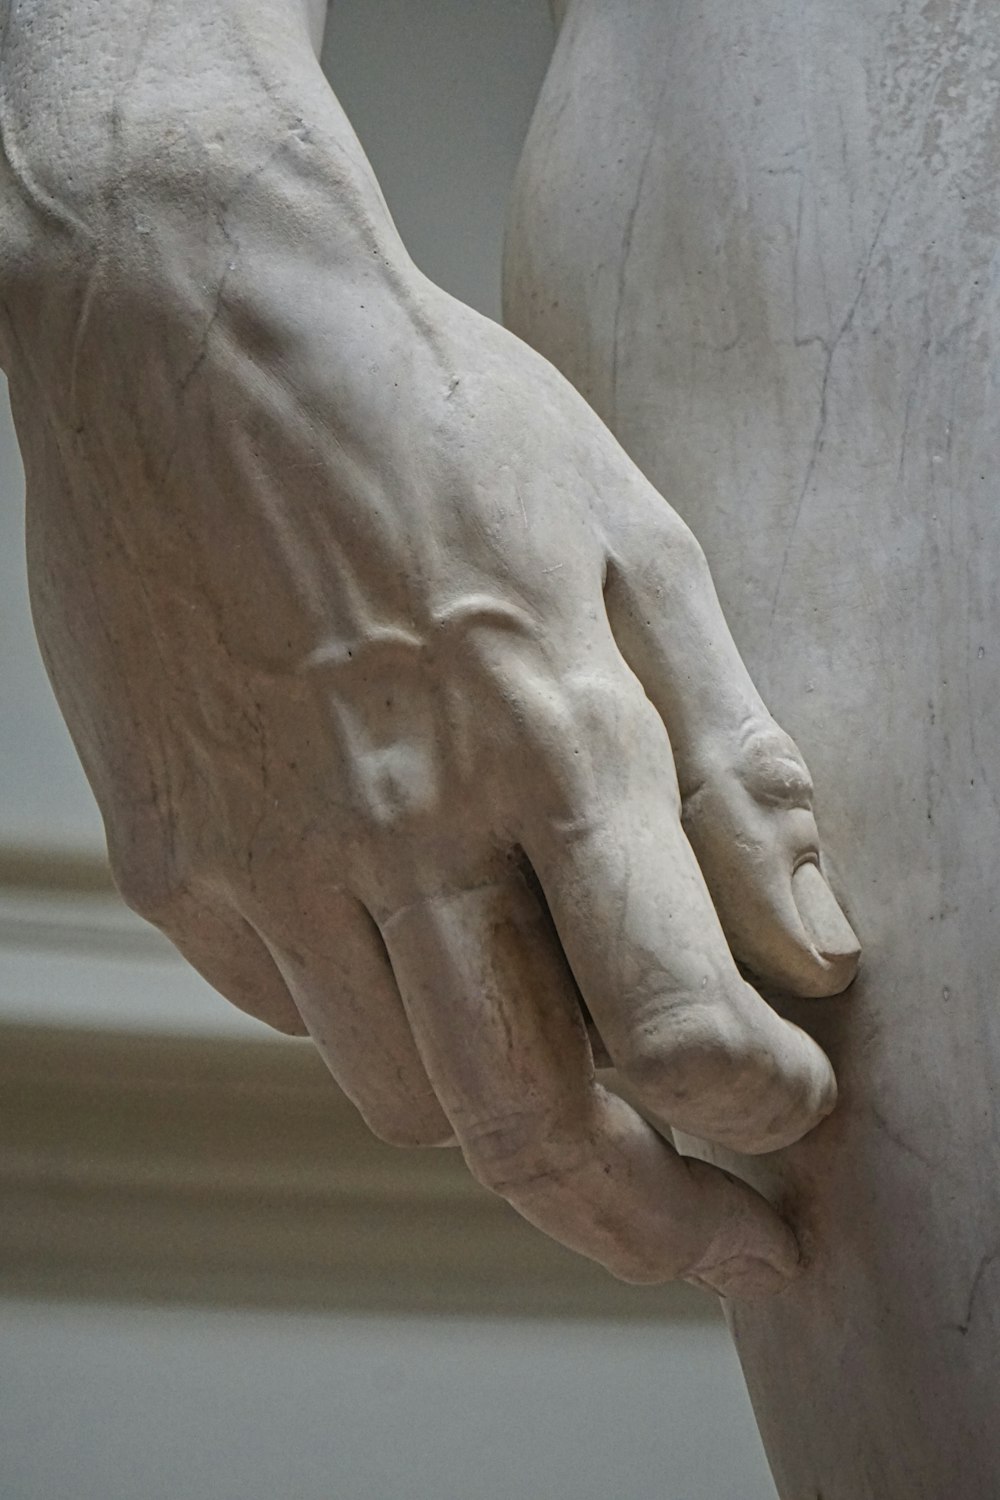 a close up of a statue of a person's hand